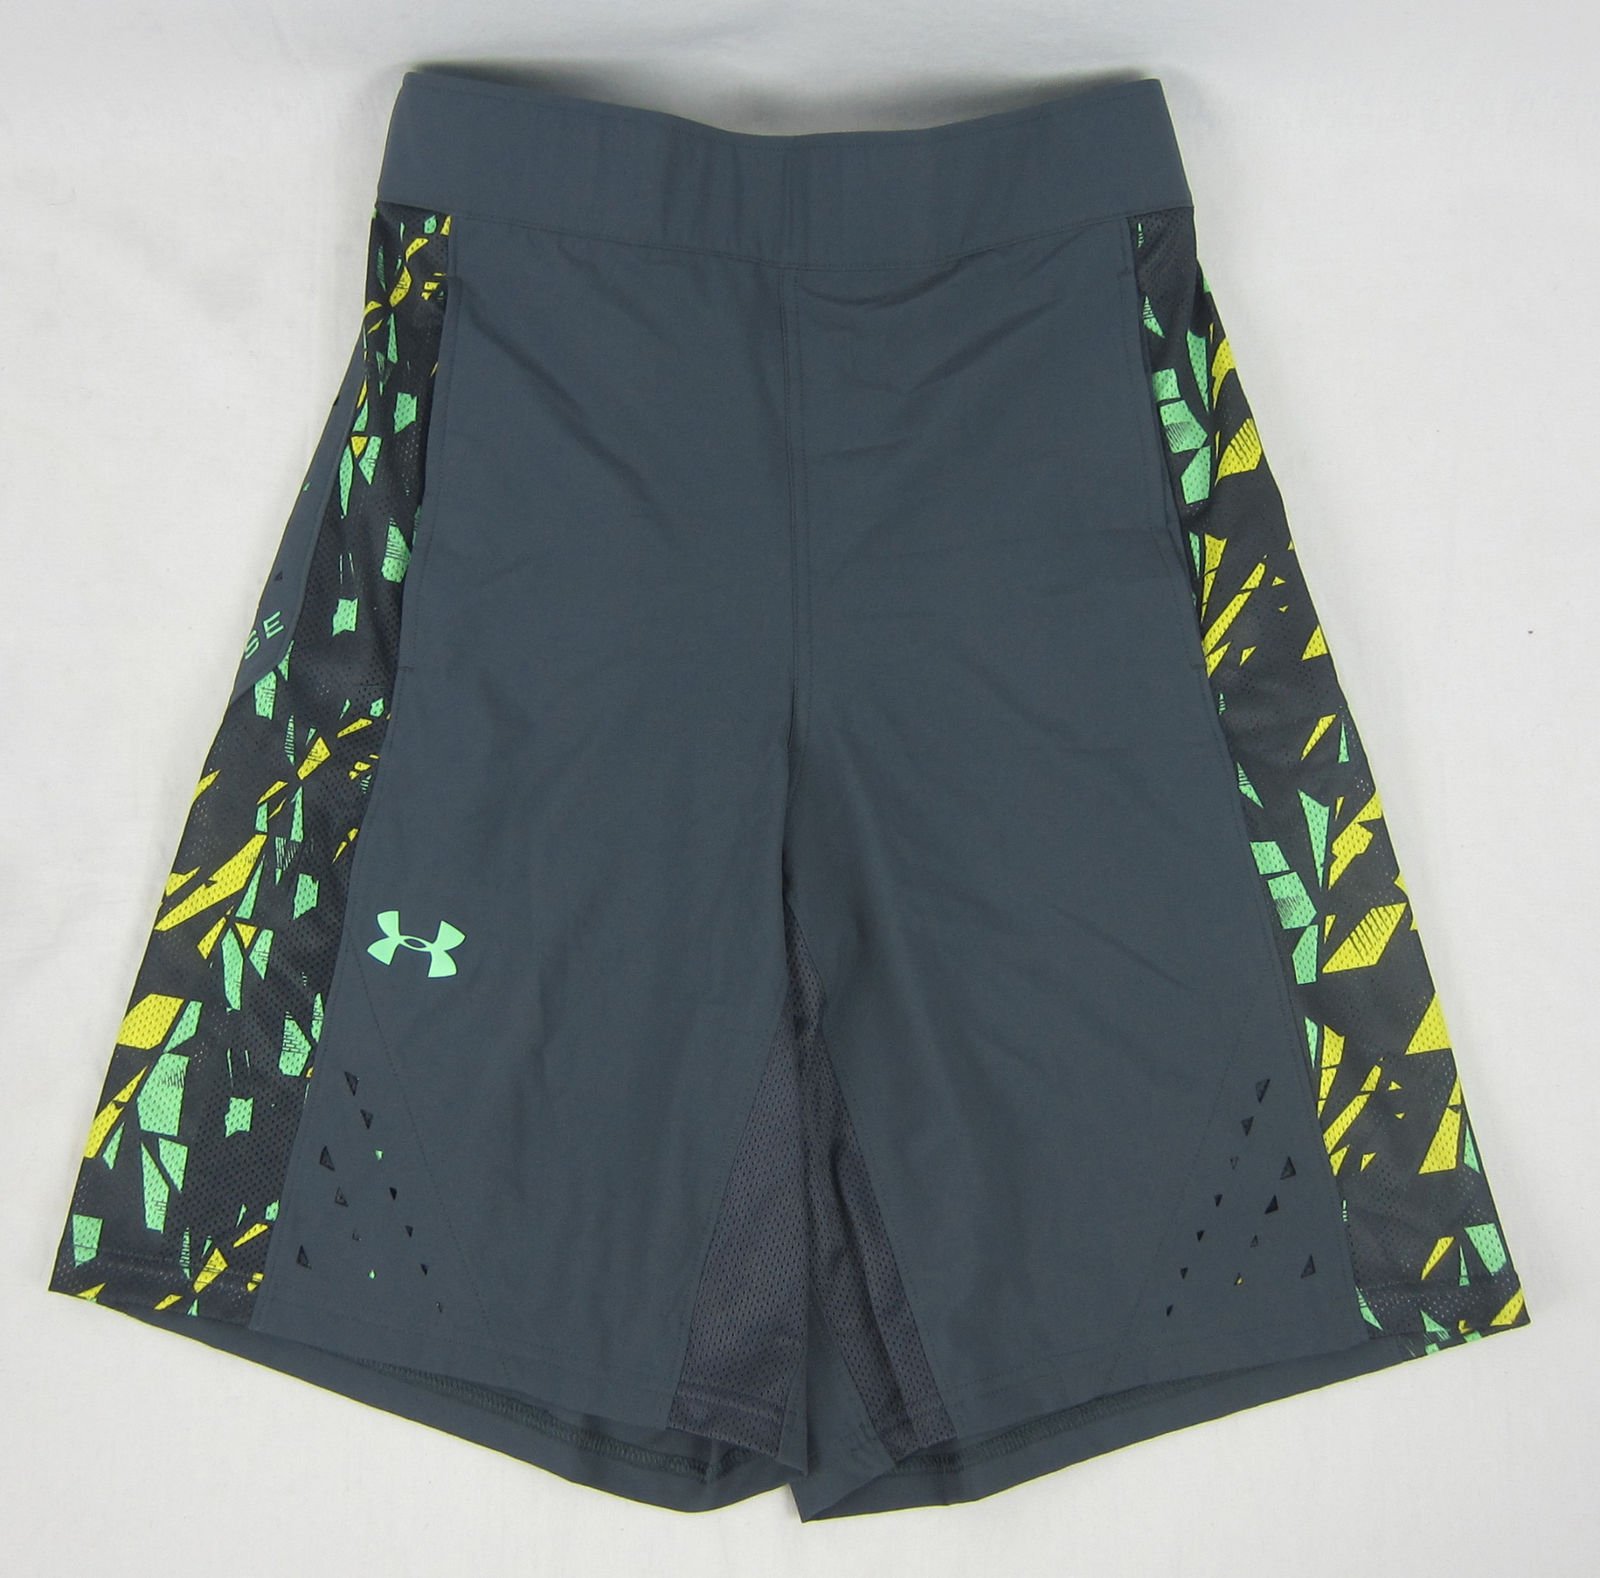 NWT Under Armour Men's Loose Fit Lacrosse Shorts Gray/Green/Yellow Size ...